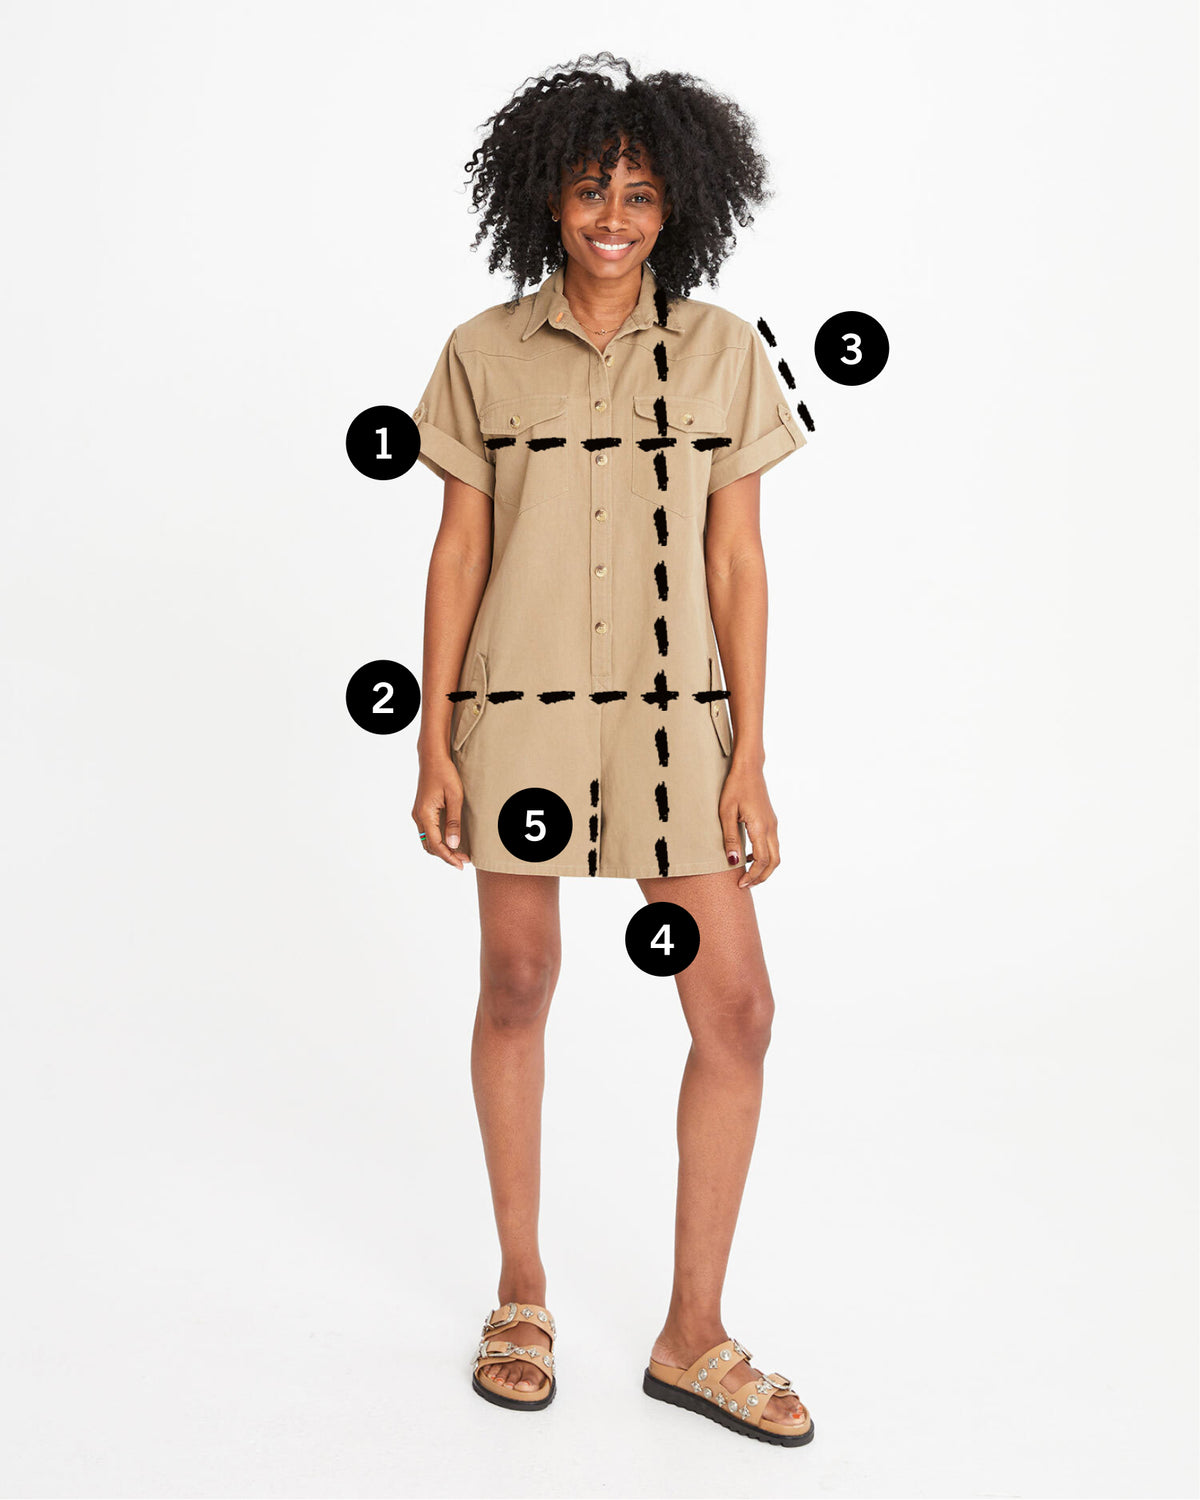 mecca wearing the jumpsuit cargo with lines showing where and how to measure the garment